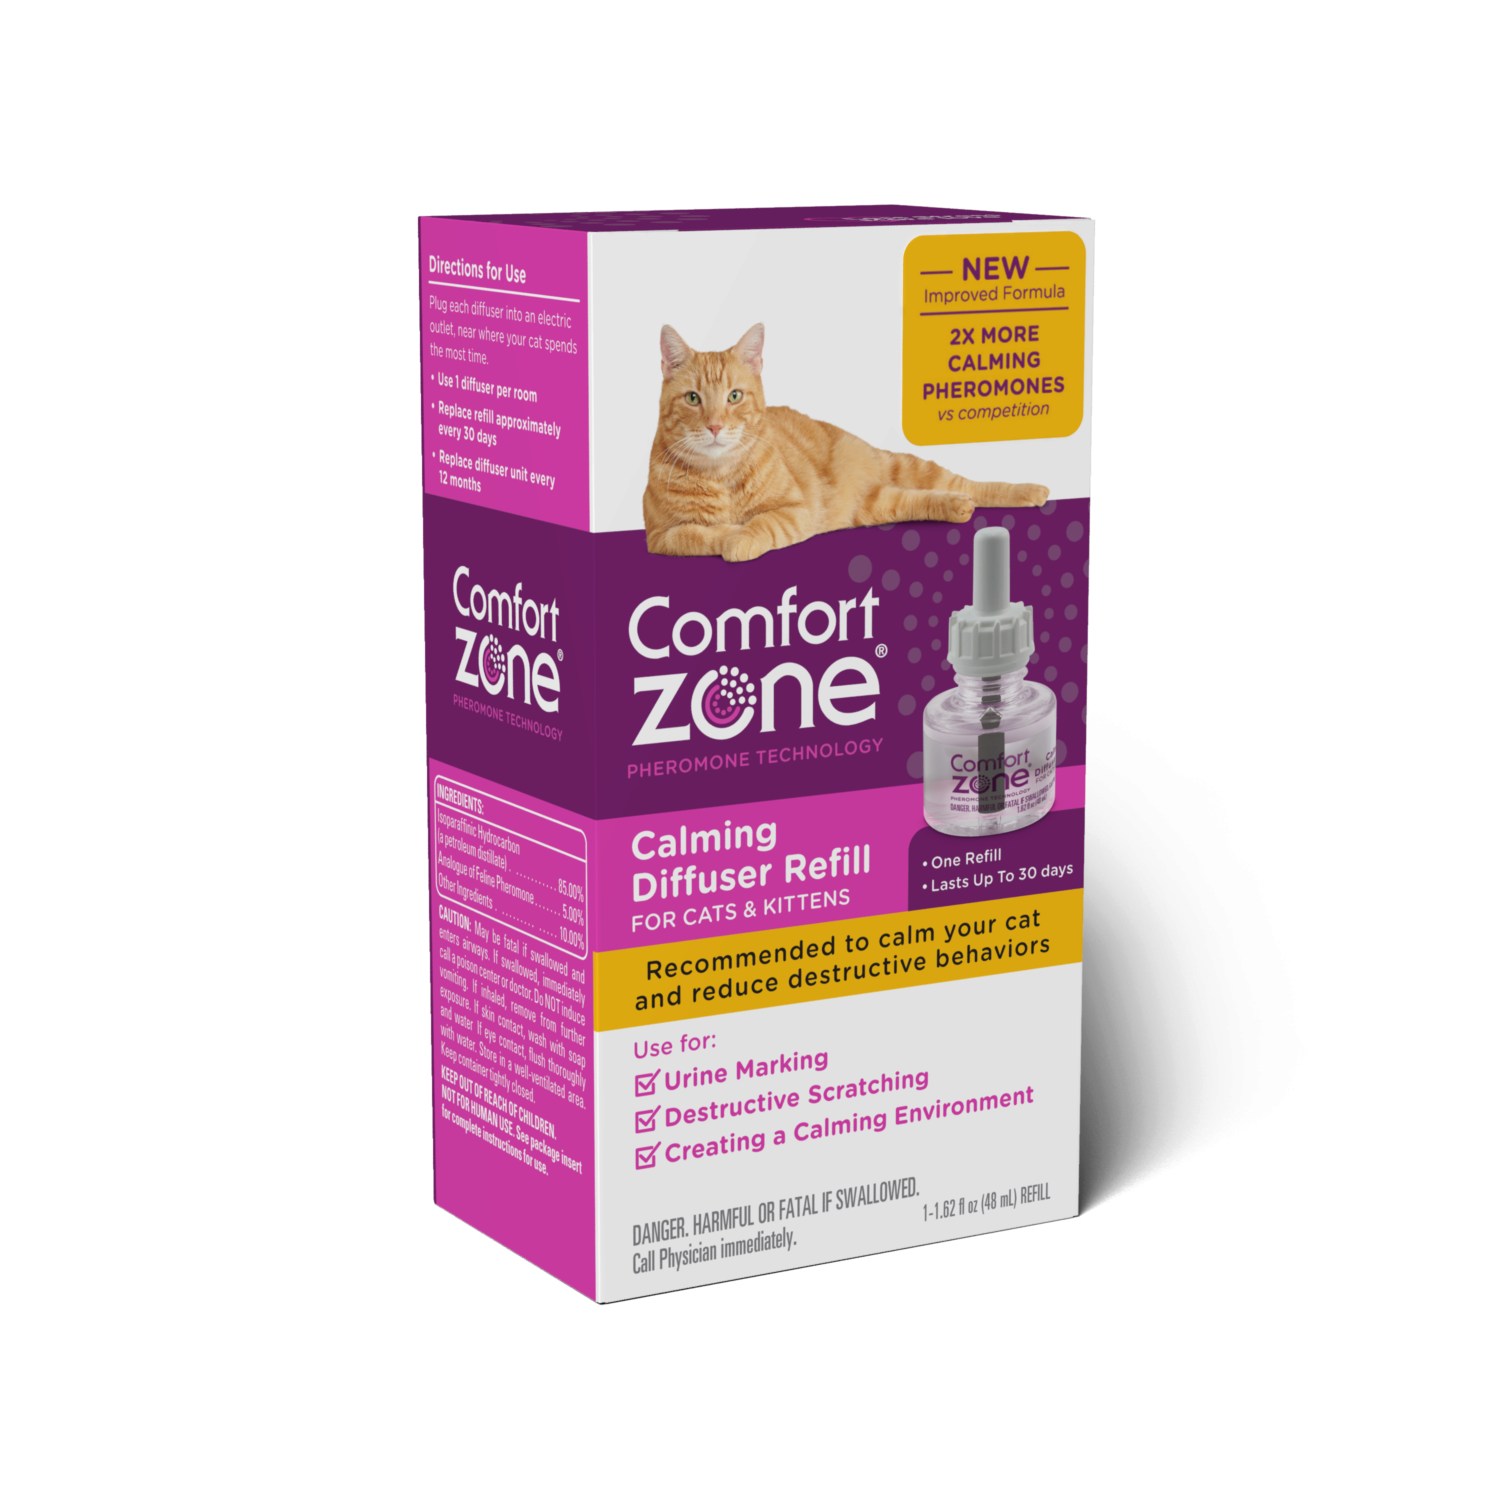 Comfort Zone® Pheromone Technology Calming Diffuser Refill for Cats & Kittens - Critter Country Supply Ltd.